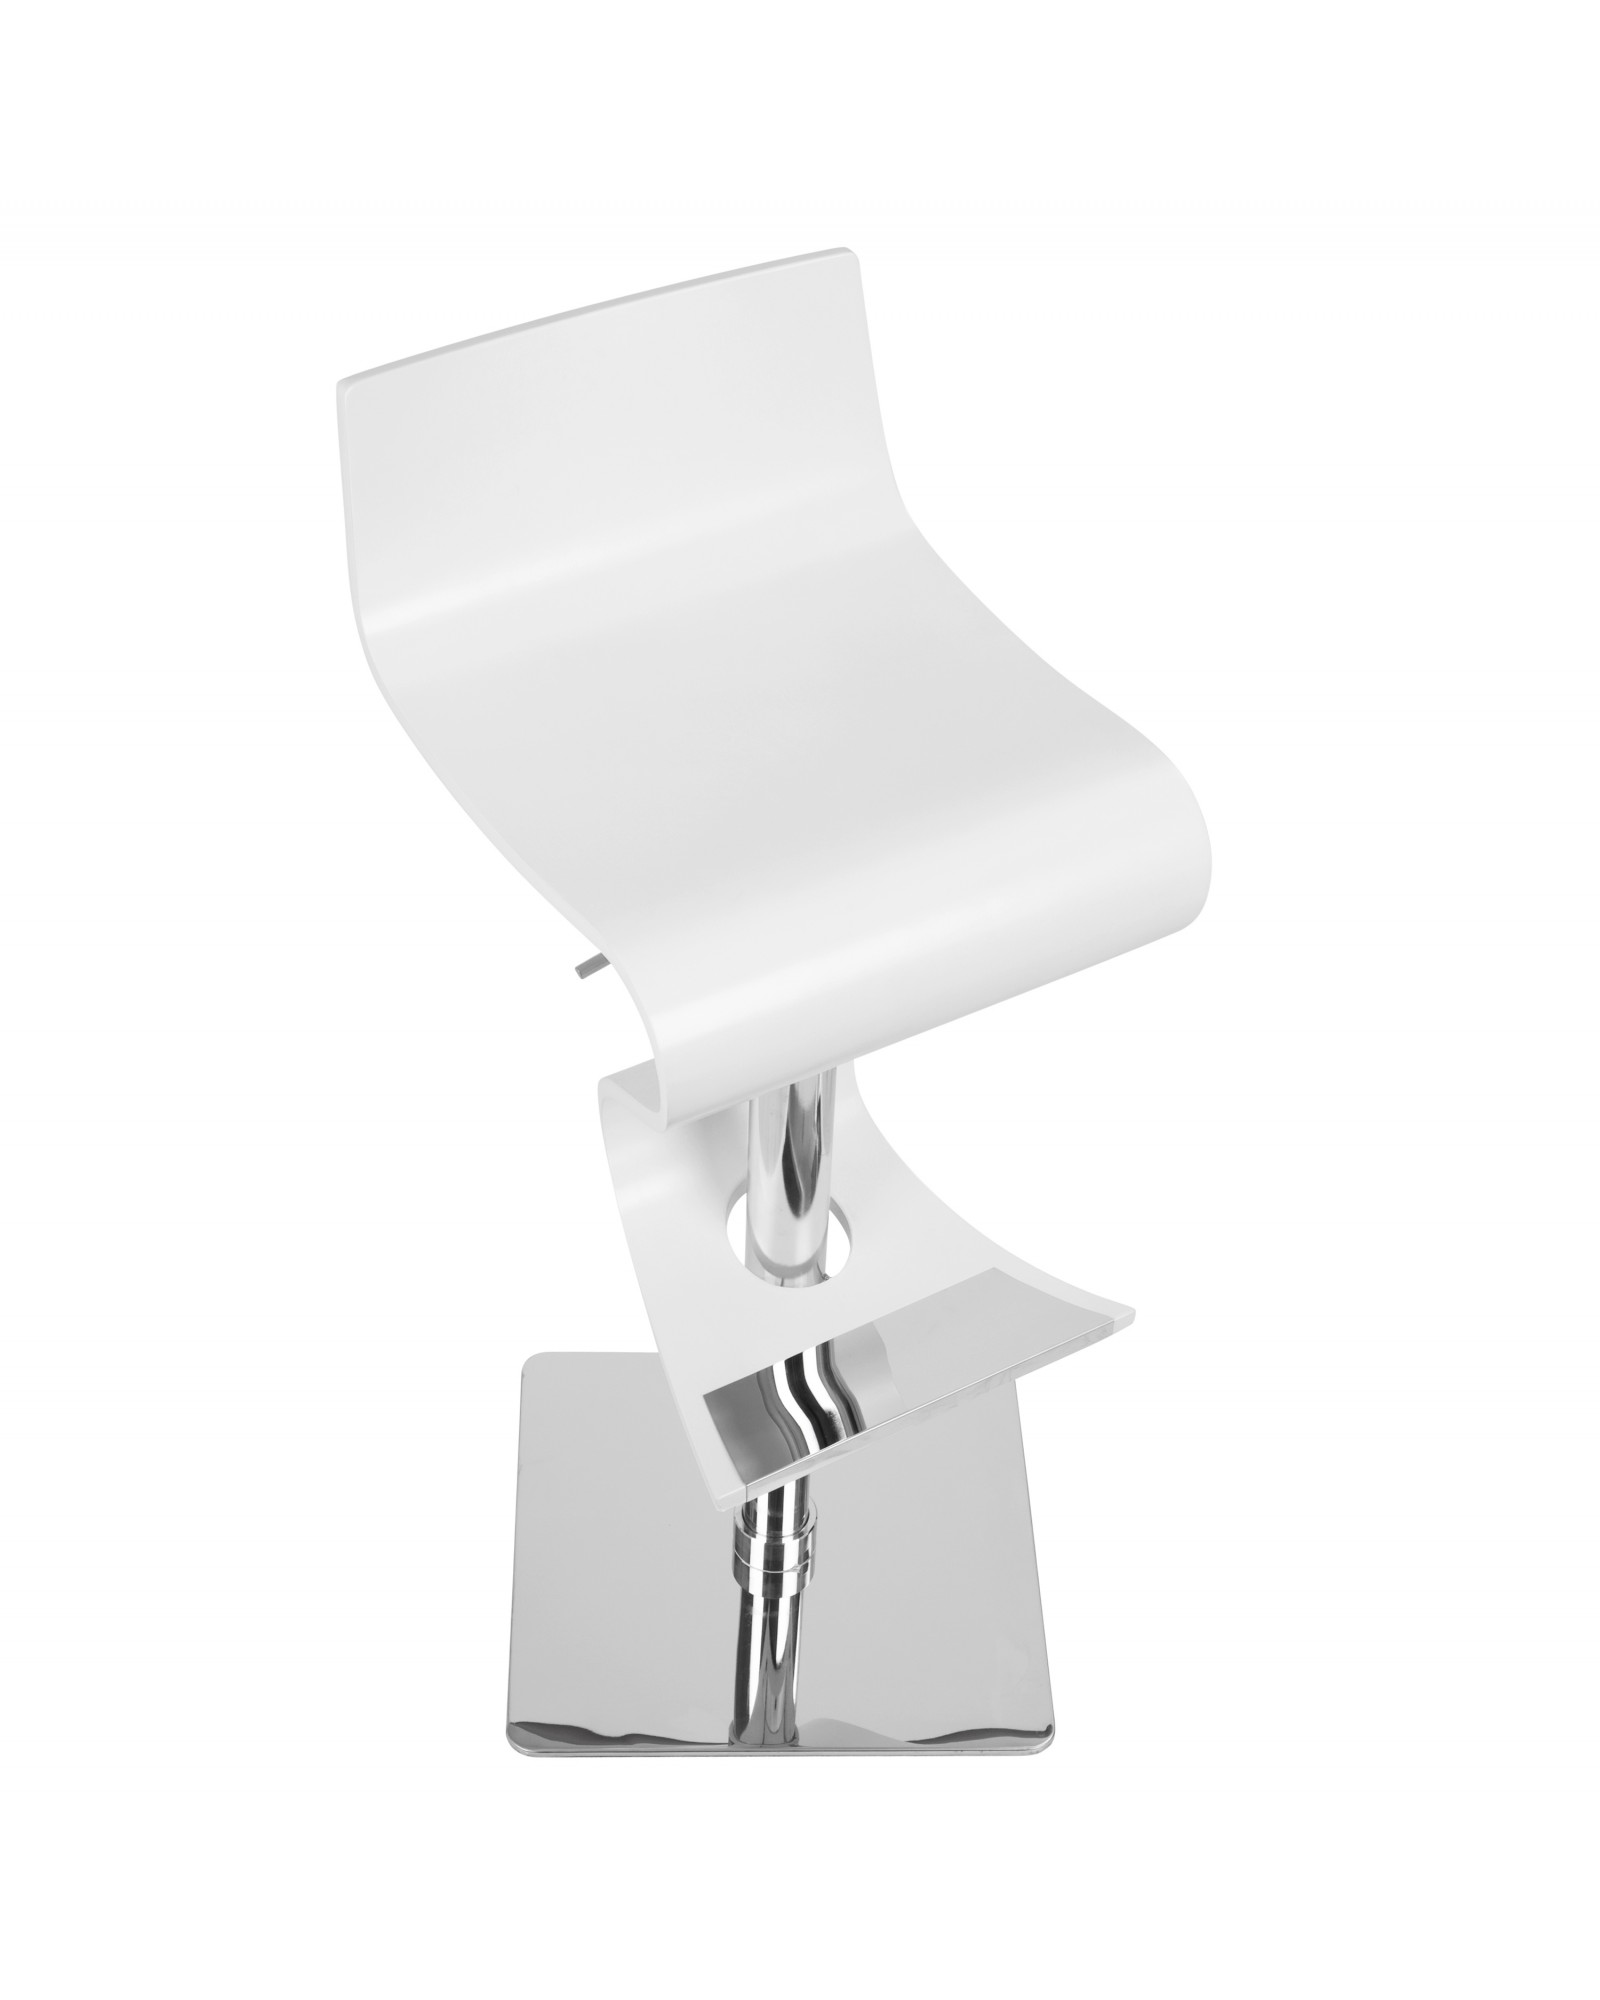 Viva Contemporary Adjustable Barstool with Swivel and White Wood